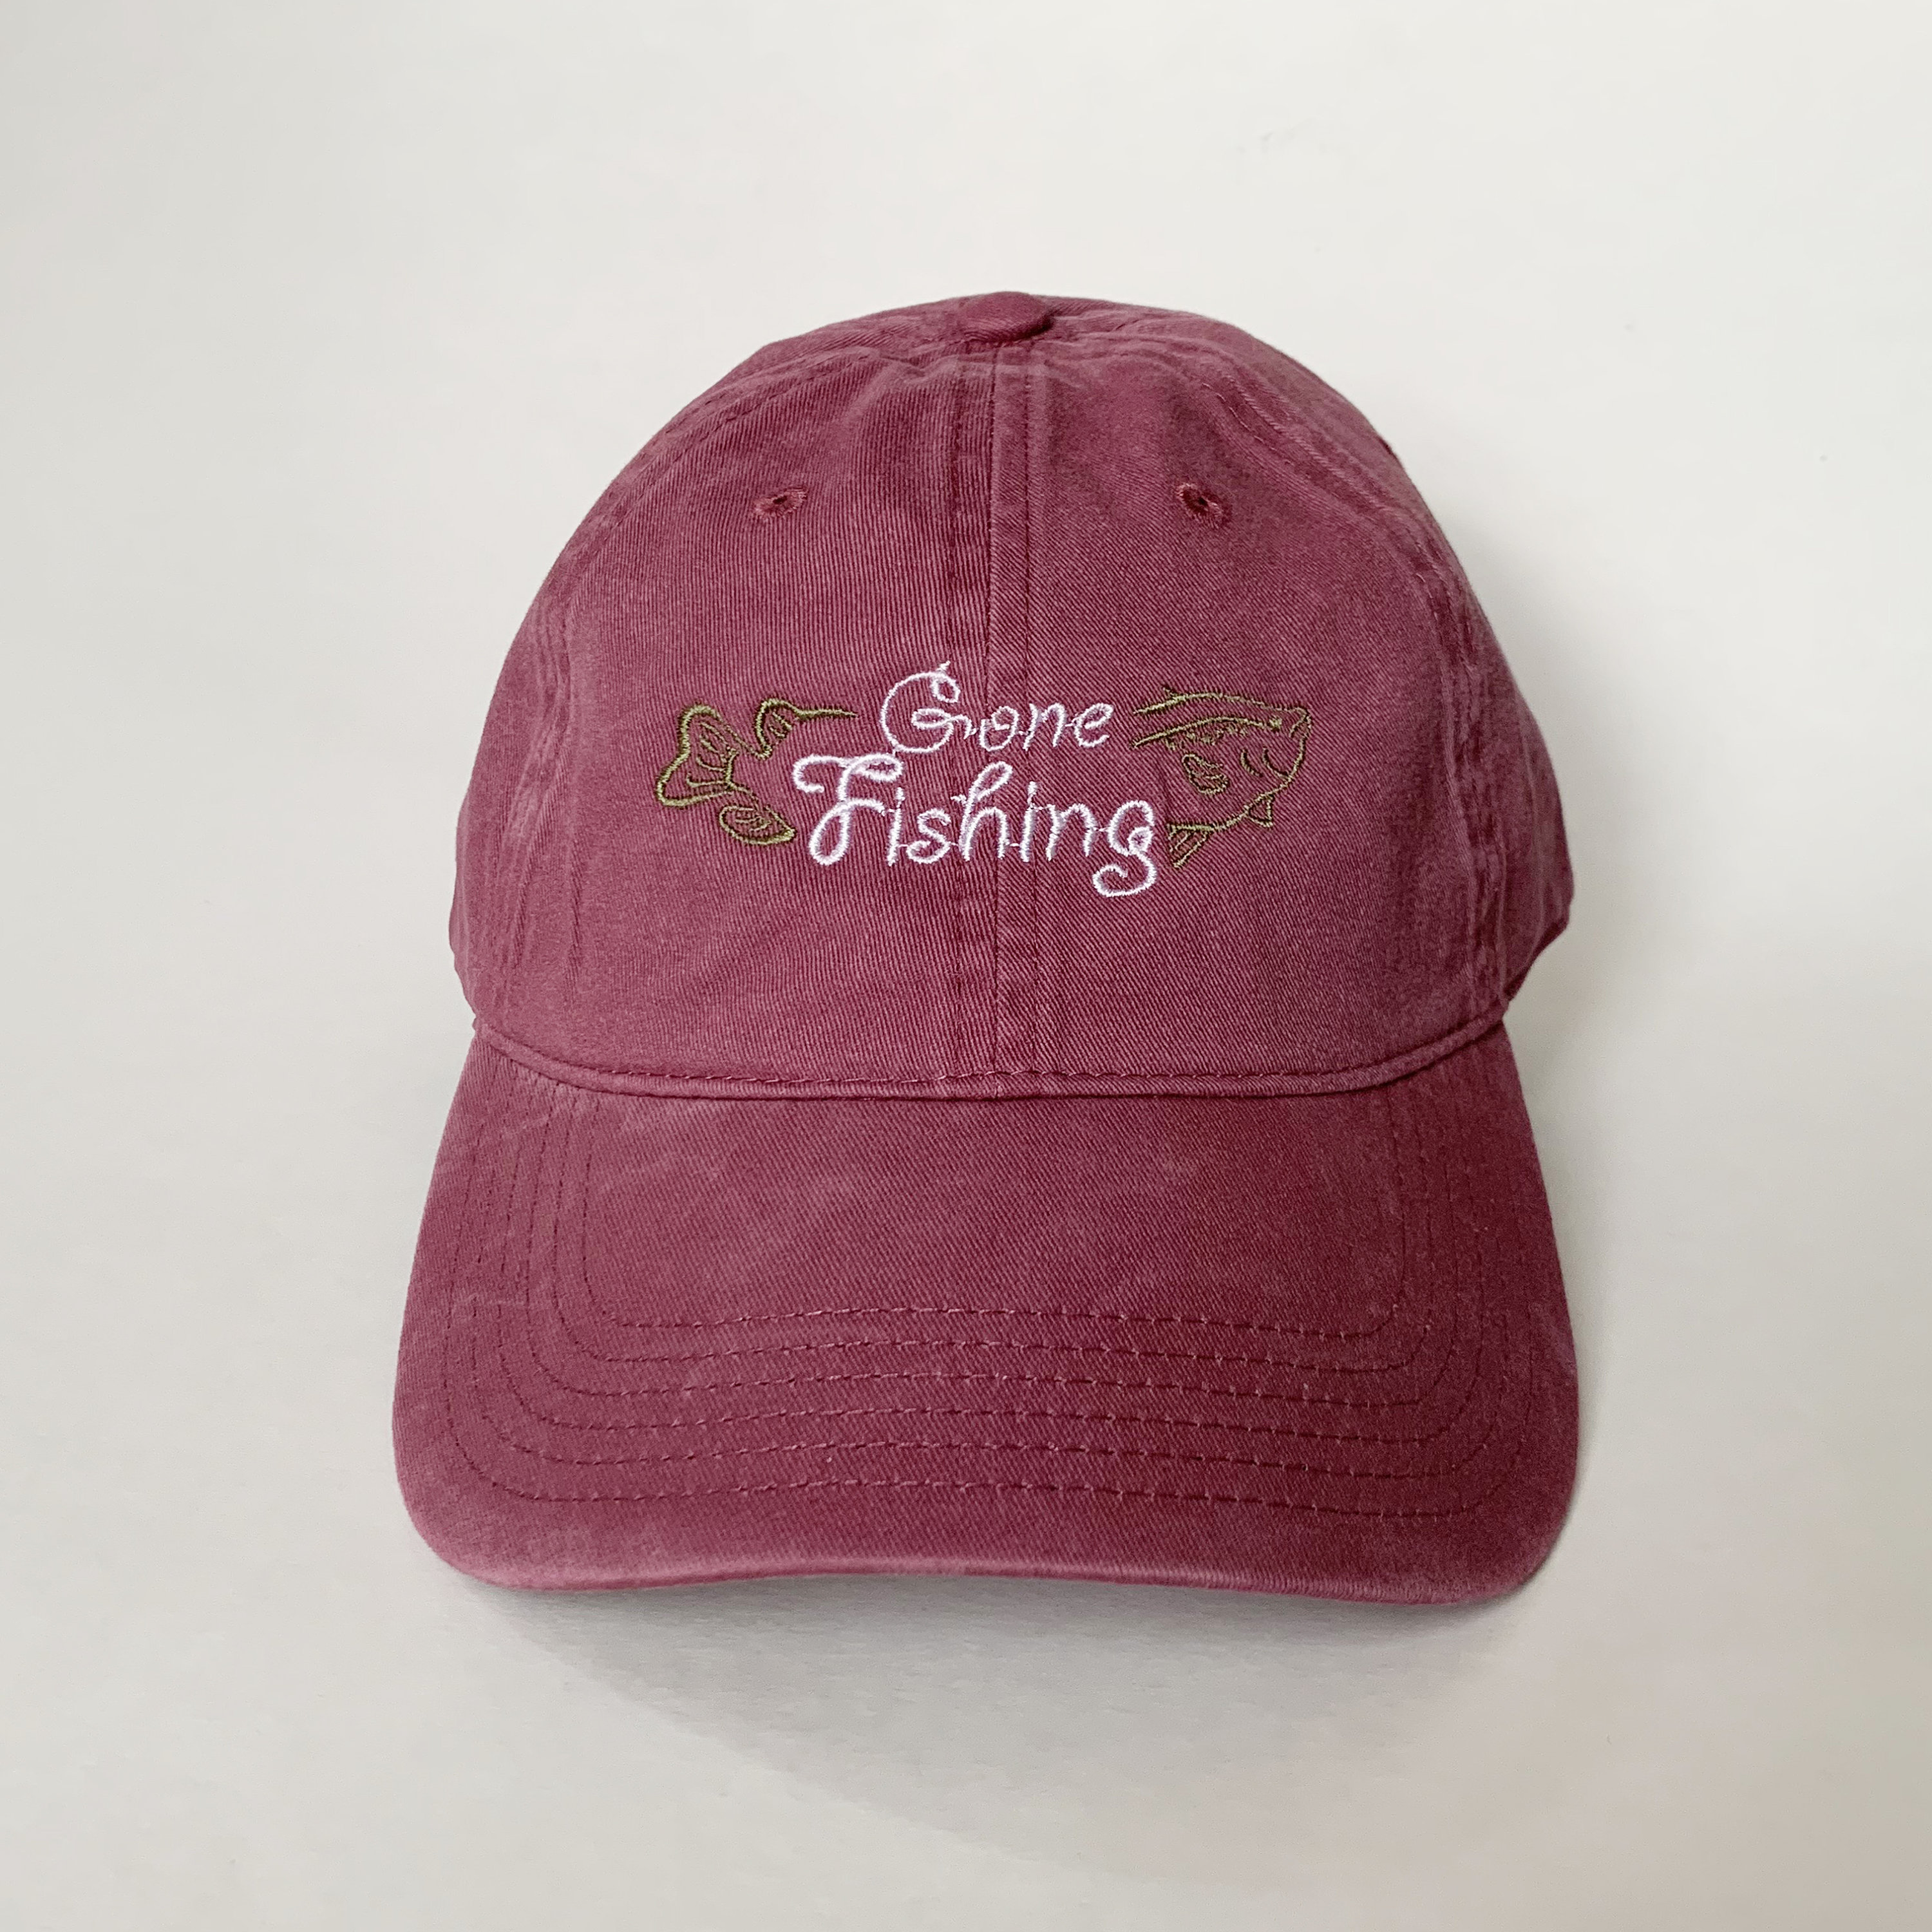 Gone Fishing Embroidered Cap Baseball Hat Washed Dad Cap 